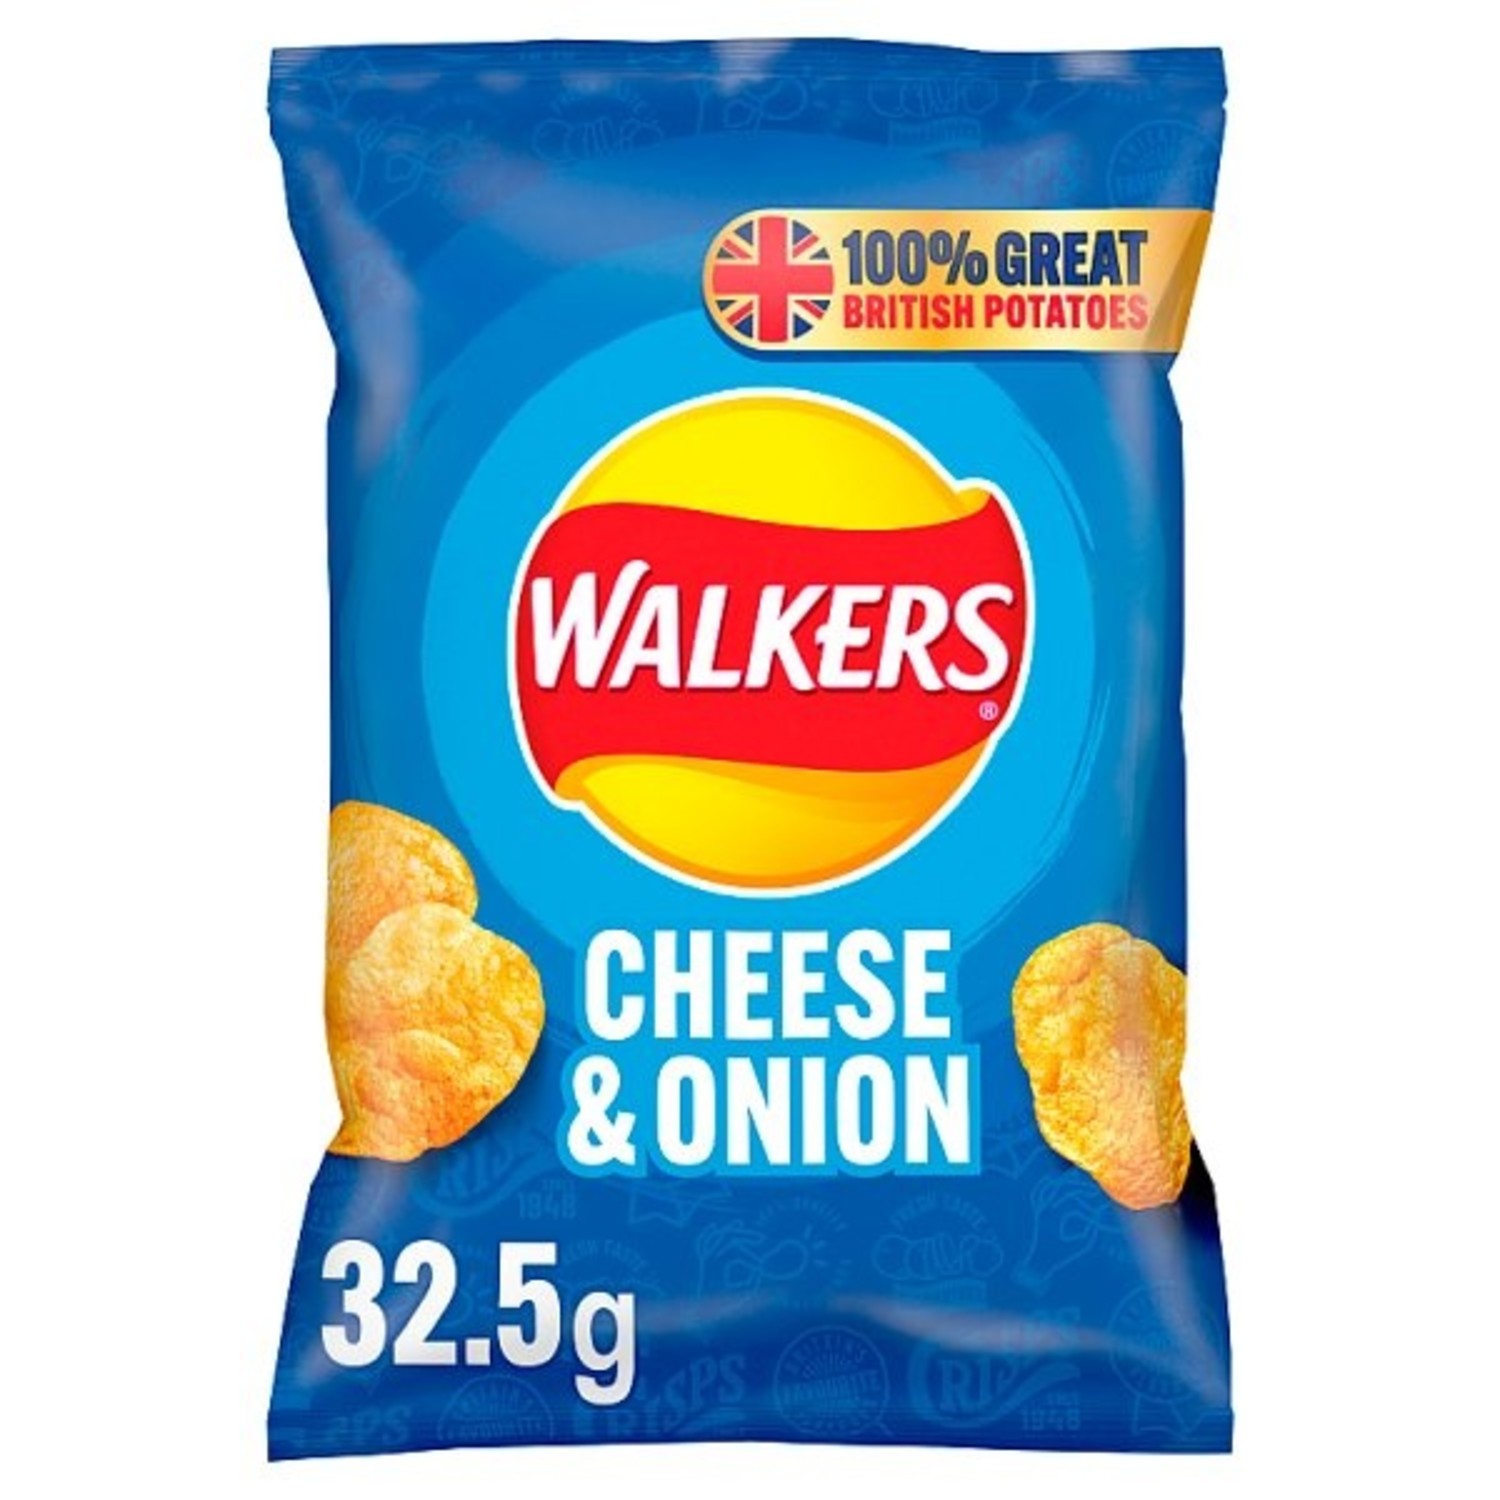 Walkers Crisps Cheese & Onion 32.5G